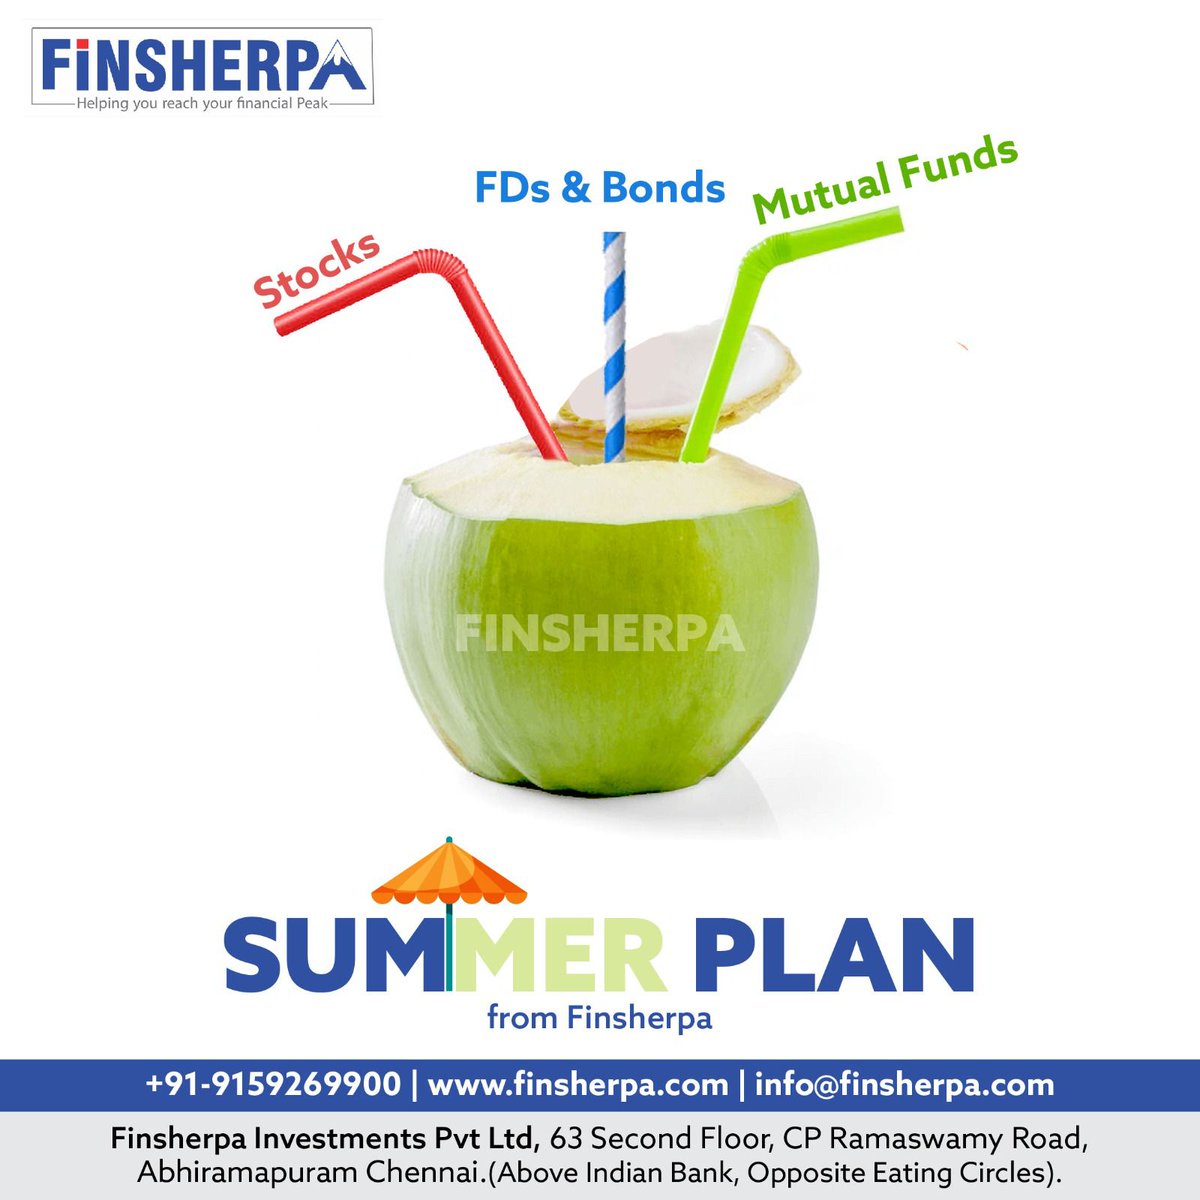 This summer, make smart financial moves with Finsherpa! Whether it's saving for that dream vacation or investing for the future, let Finsherpa be your guide.